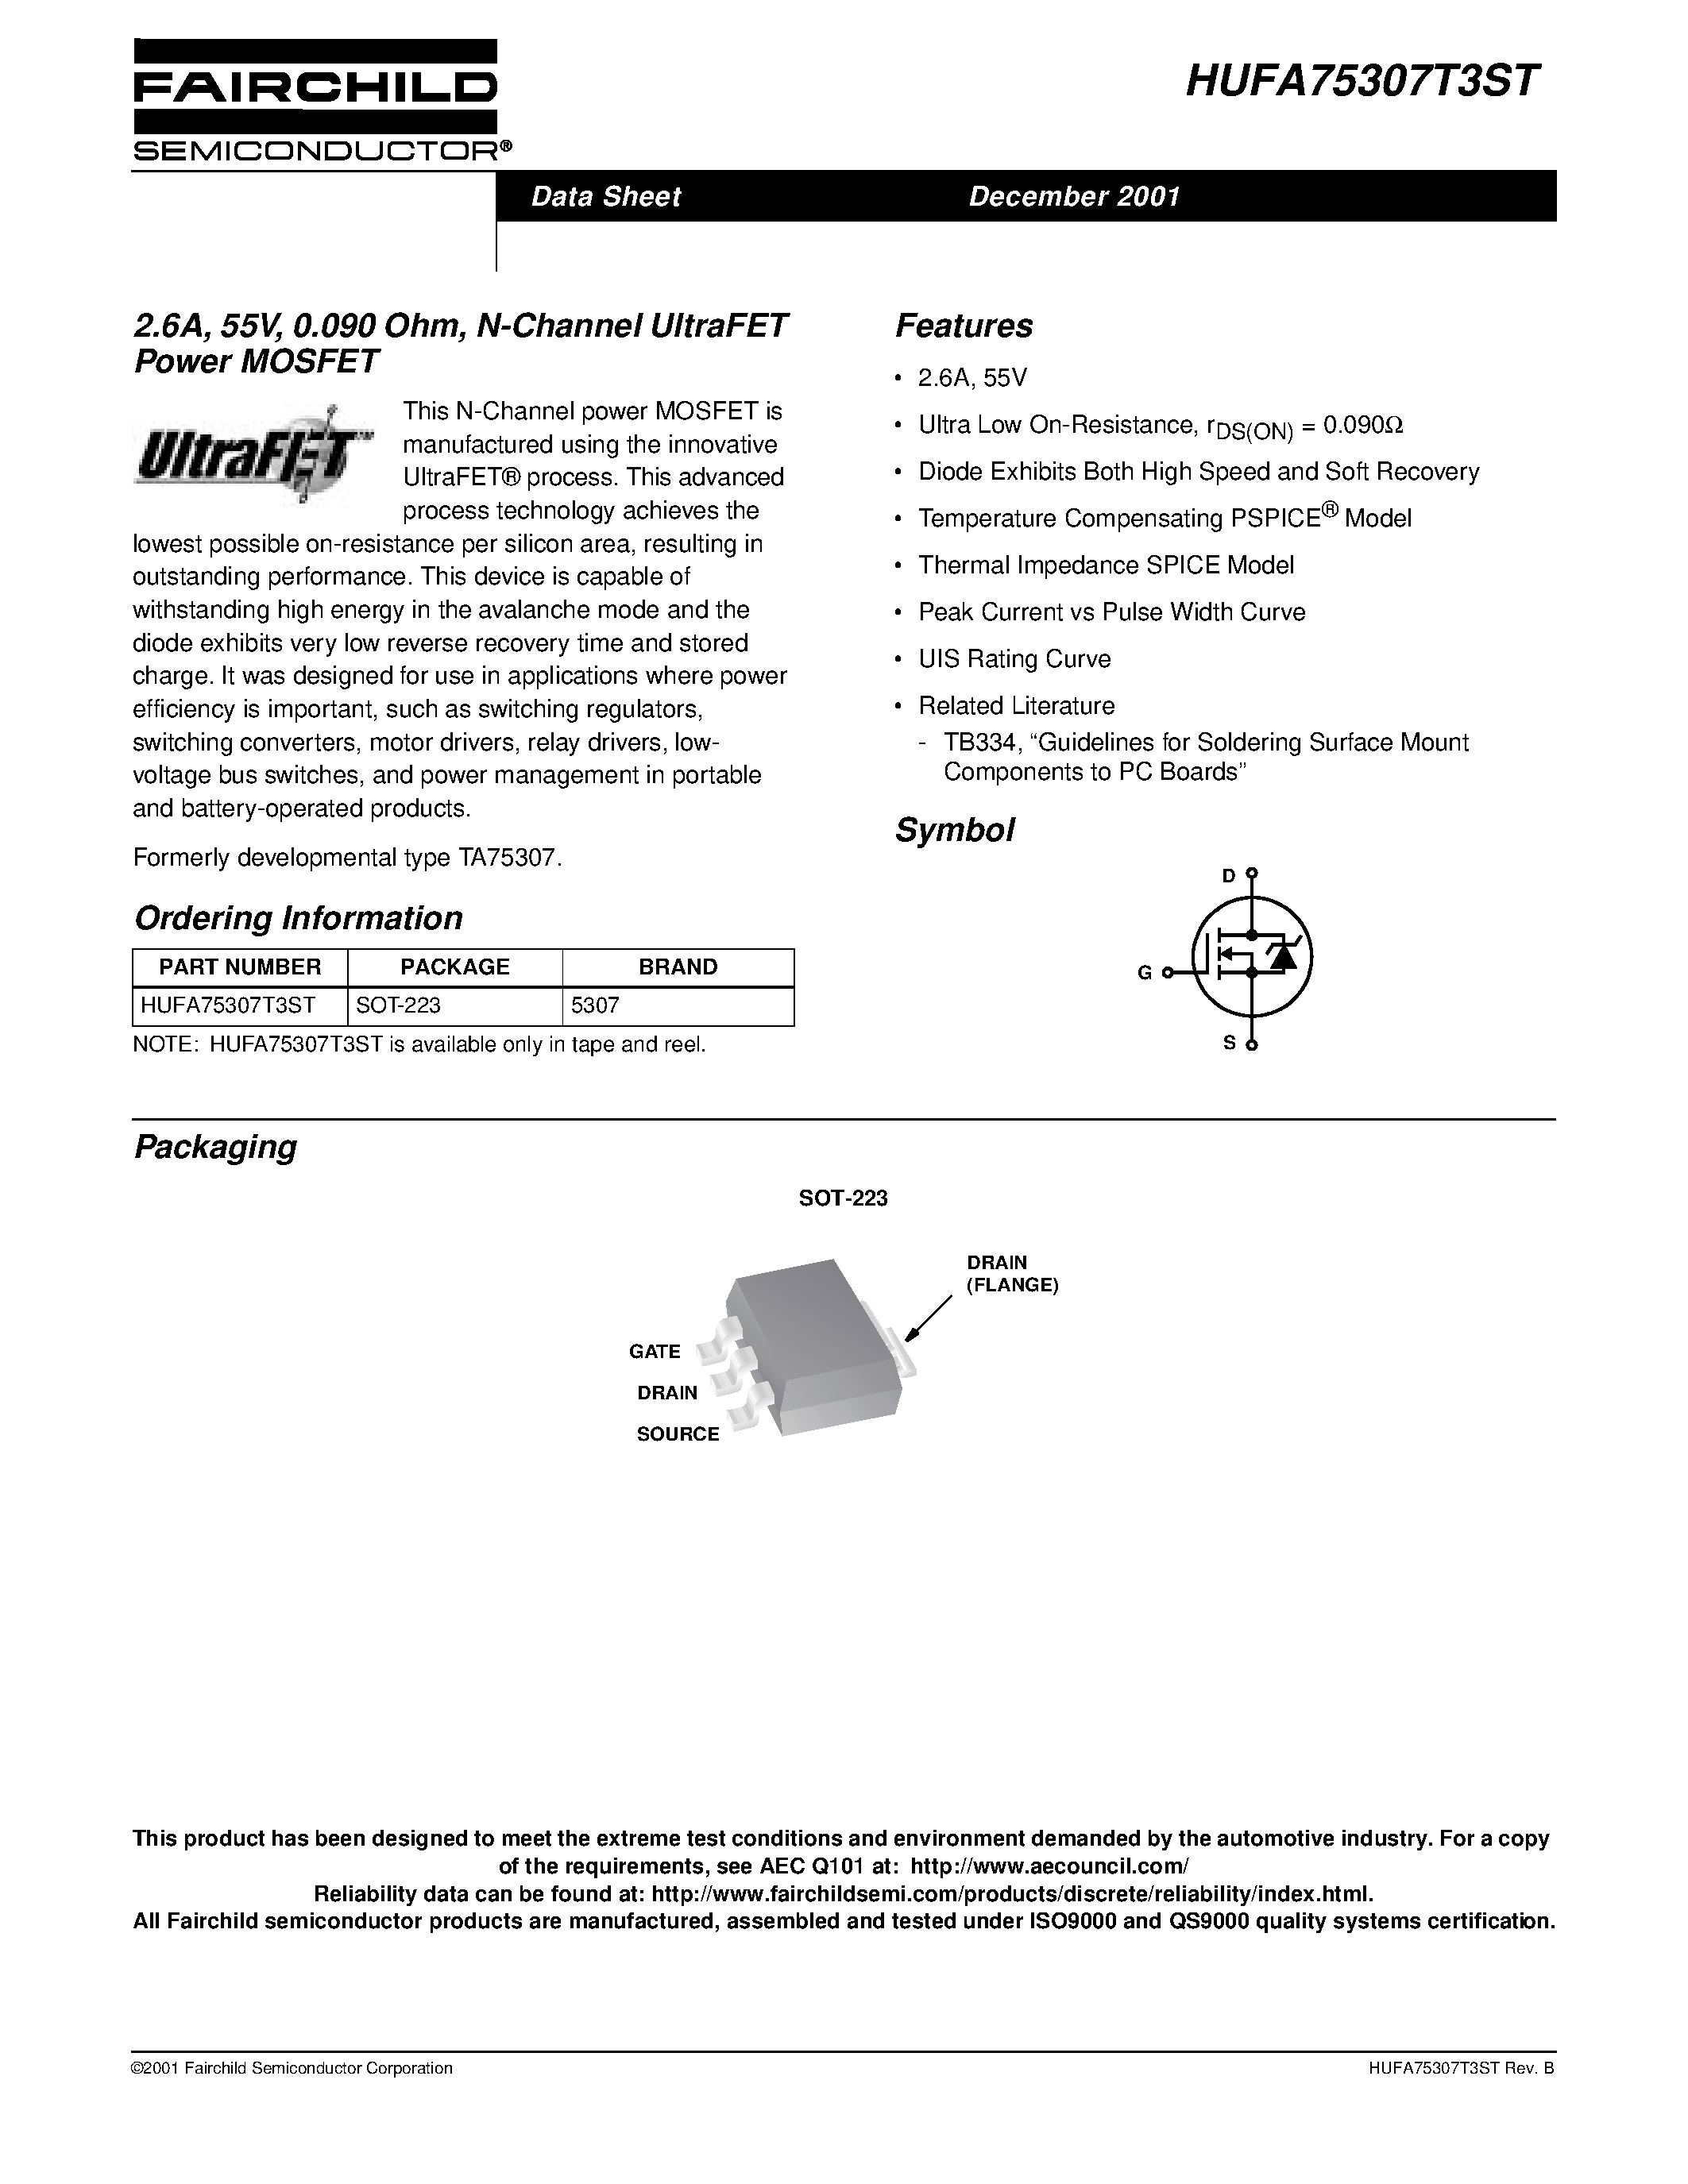 Datasheet HUFA75307T3ST - 2.6A/ 55V/ 0.090 Ohm/ N-Channel UltraFET Power MOSFET page 1